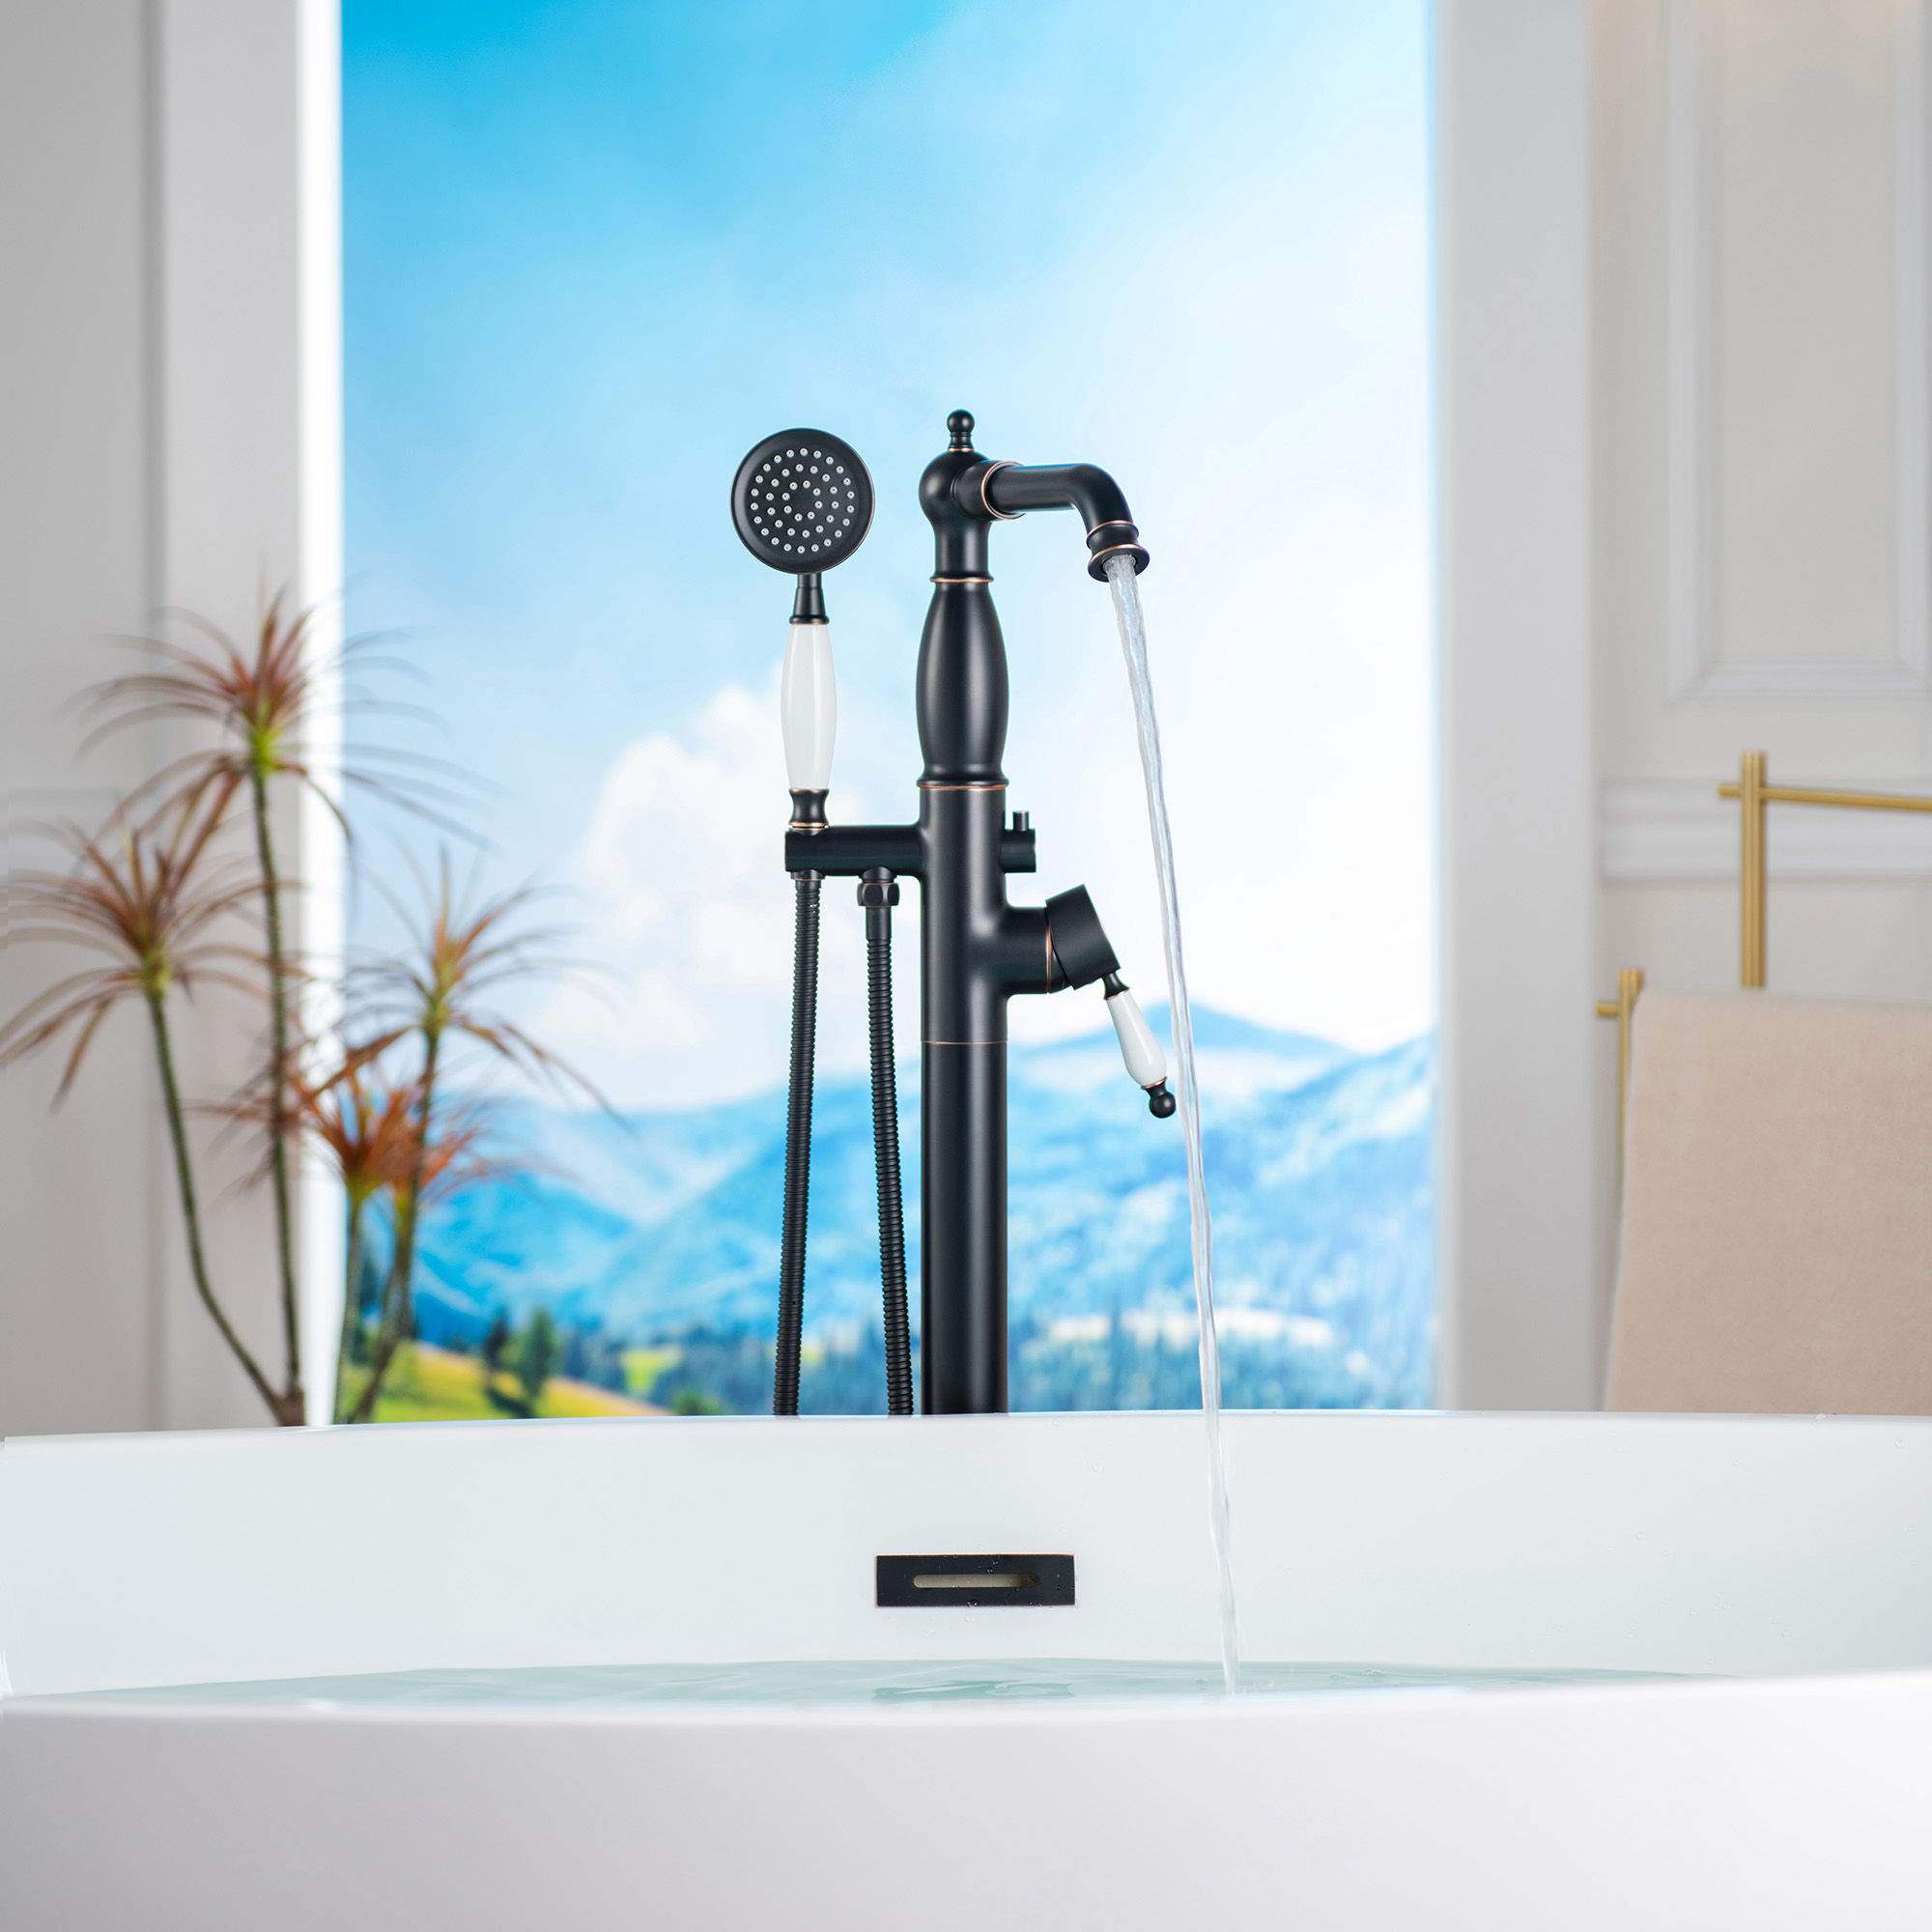  WOODBRIDGE F0049ORB Fusion Single Handle Floor Mount Freestanding Tub Filler Faucet with Telephone Hand shower in Oil Rubbed Bronze Finish_12275